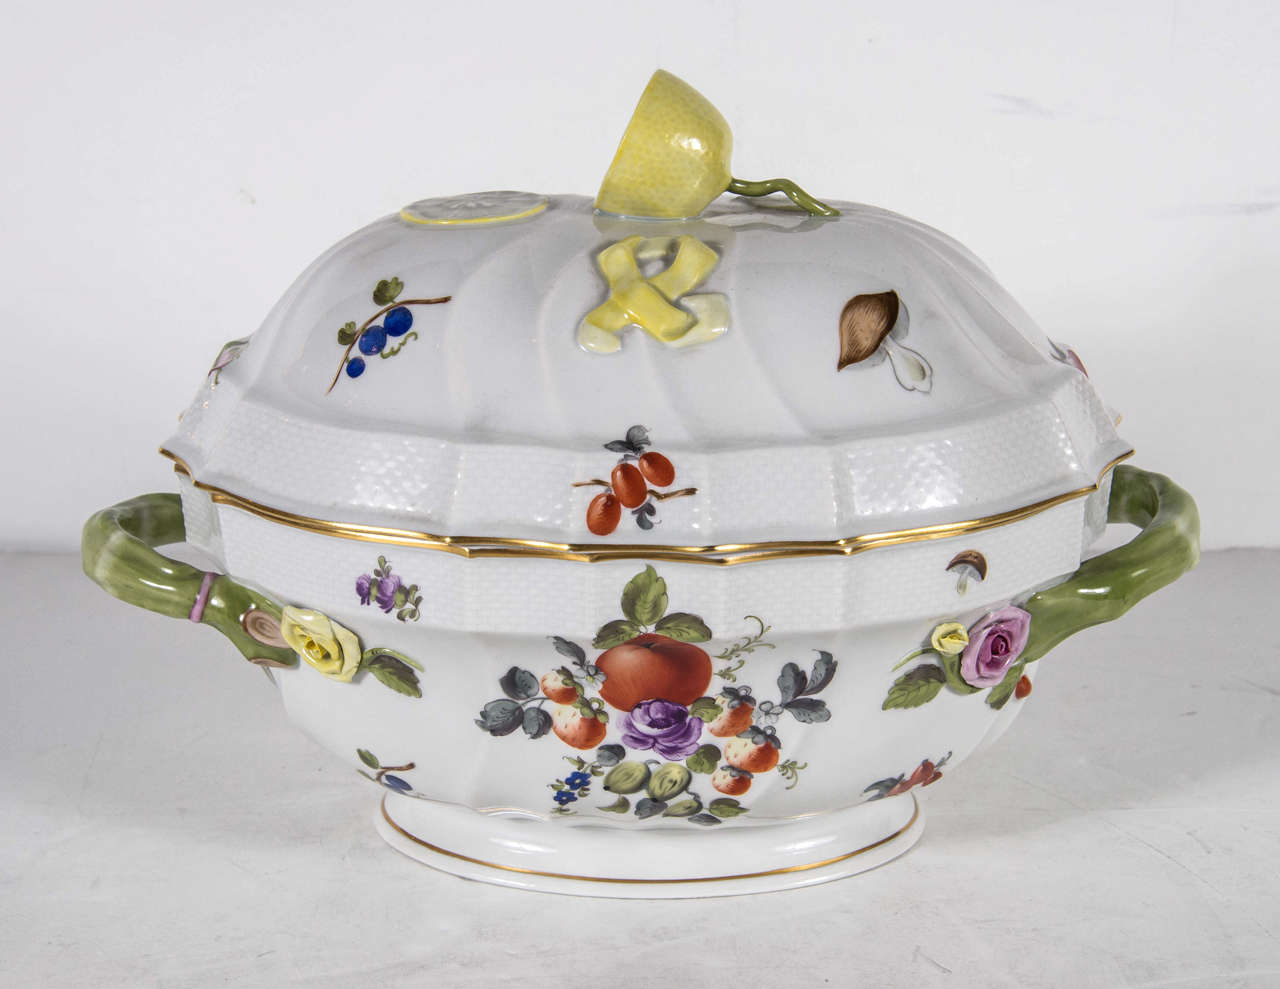 This mint condition tureen features hand painted detailing of flowers, fruit, and insects. It also has stylized asparagus handles and a lemon atop the dome serves as a handle. The tureen is trimmed in 24k yellow gold and is marked Herend, Hungary on